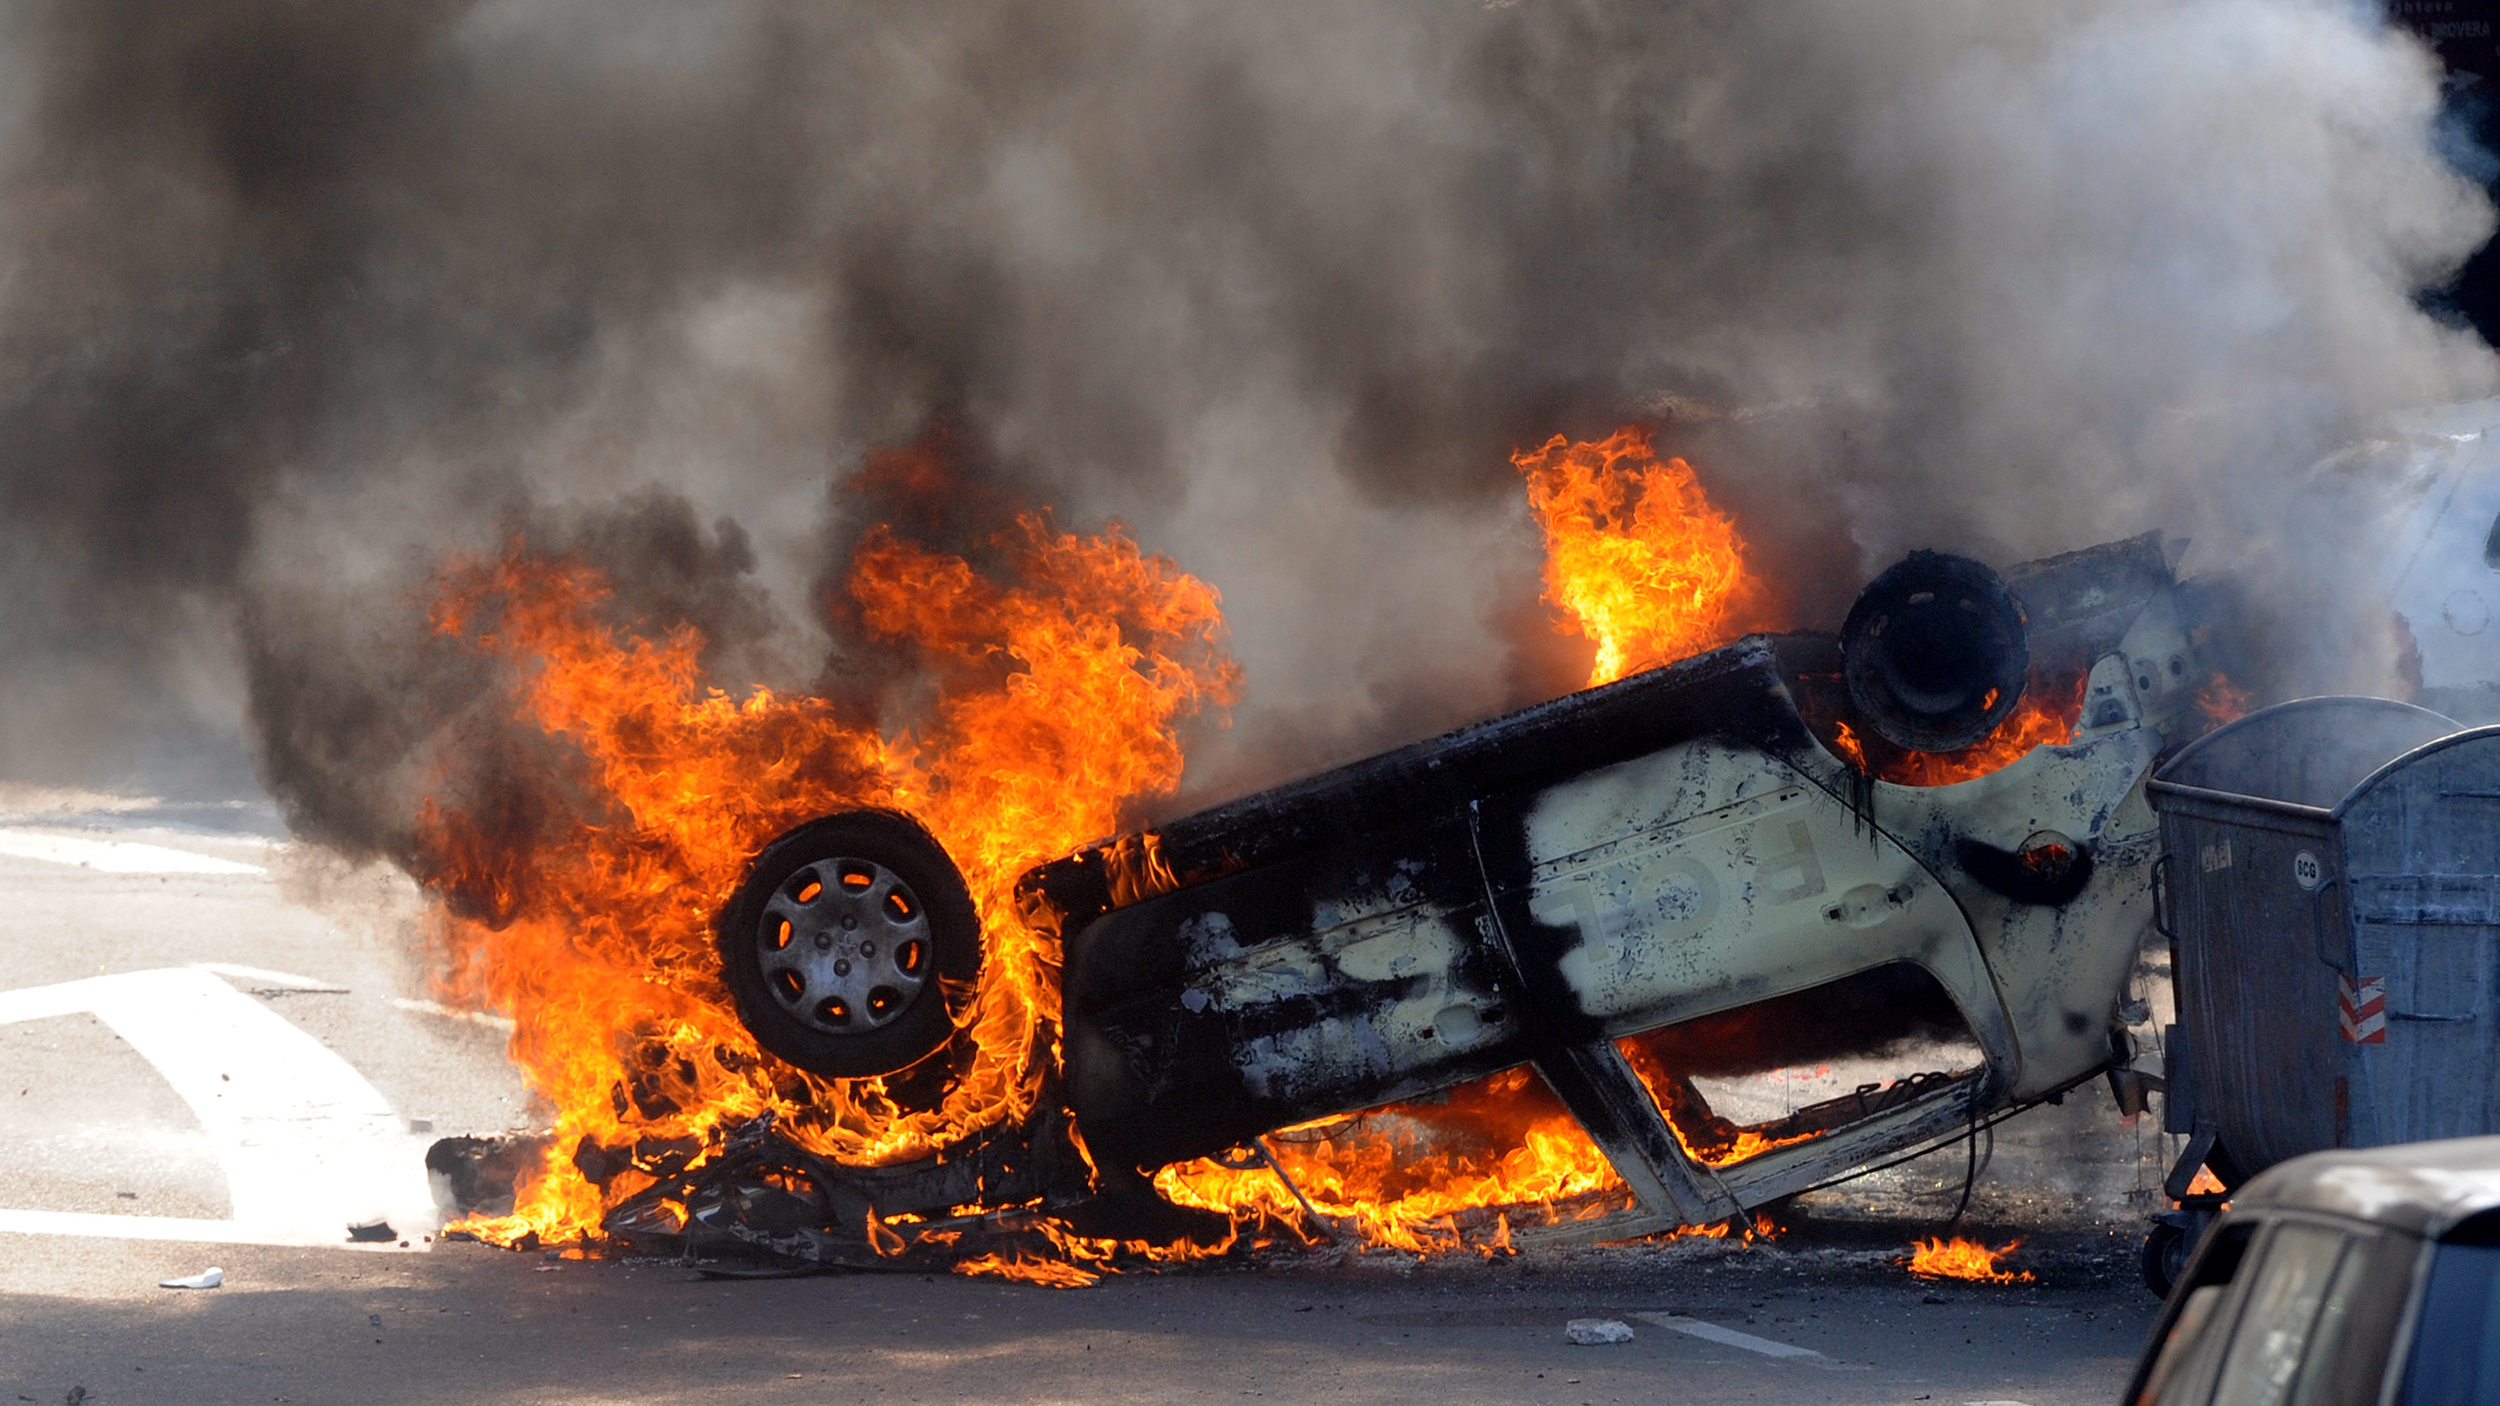 A burning car on the side of the road.